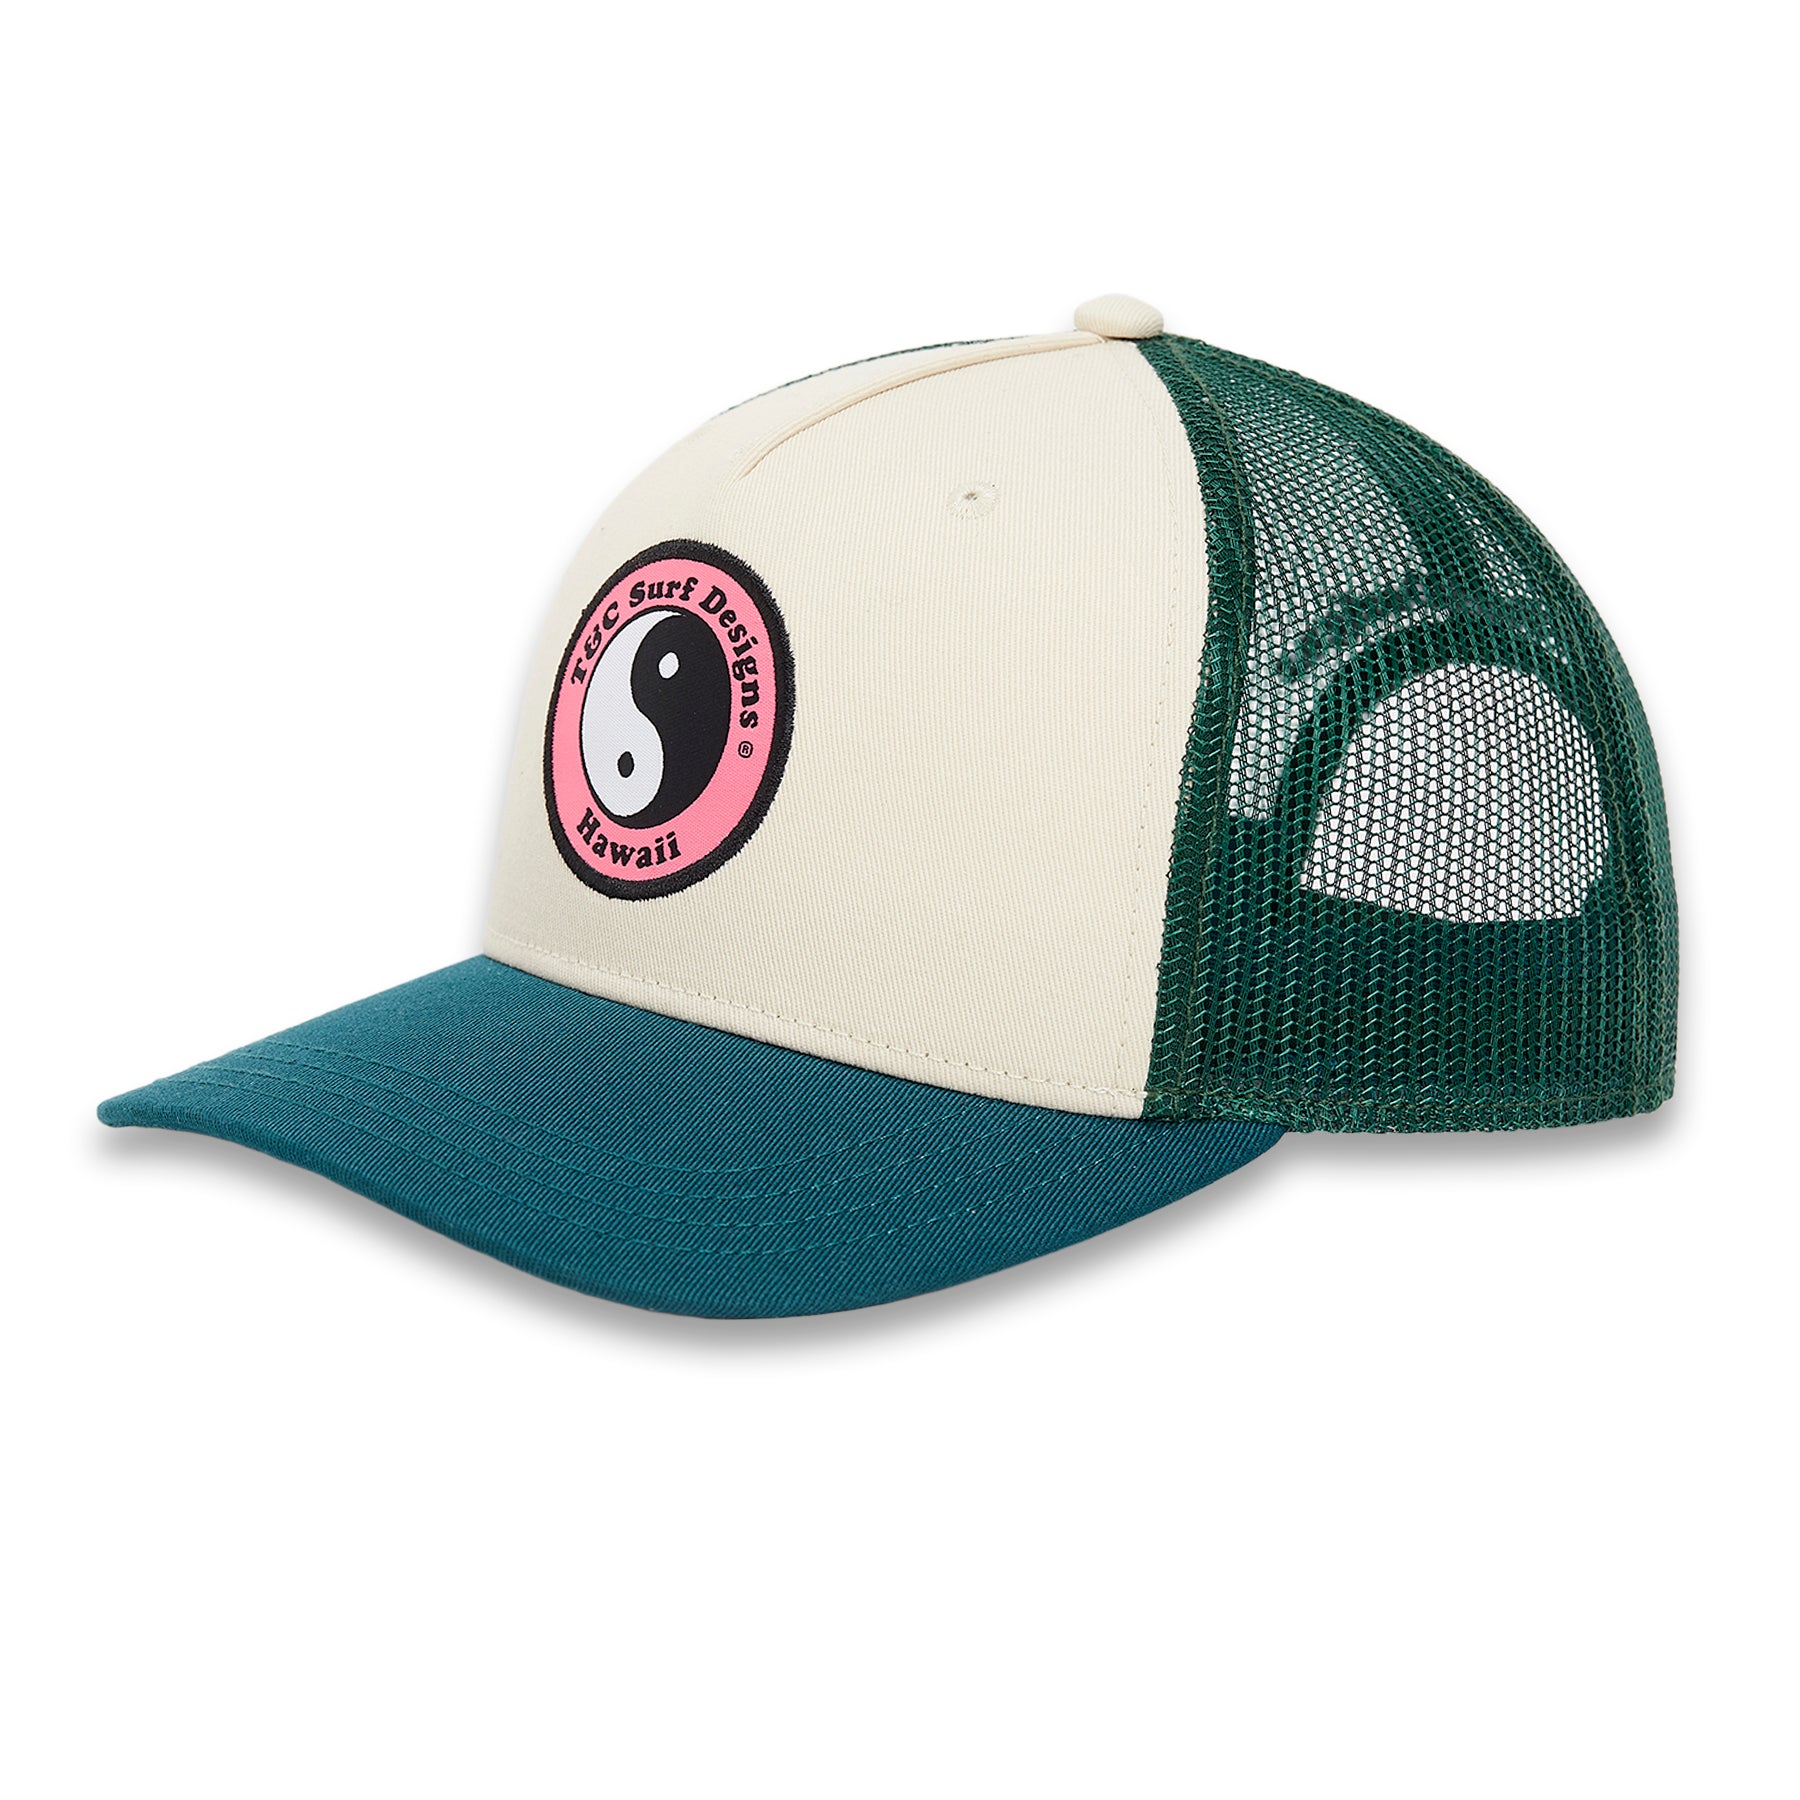 Town & Country Surf Designs YY Trucker Cap - Green Sea / Pink